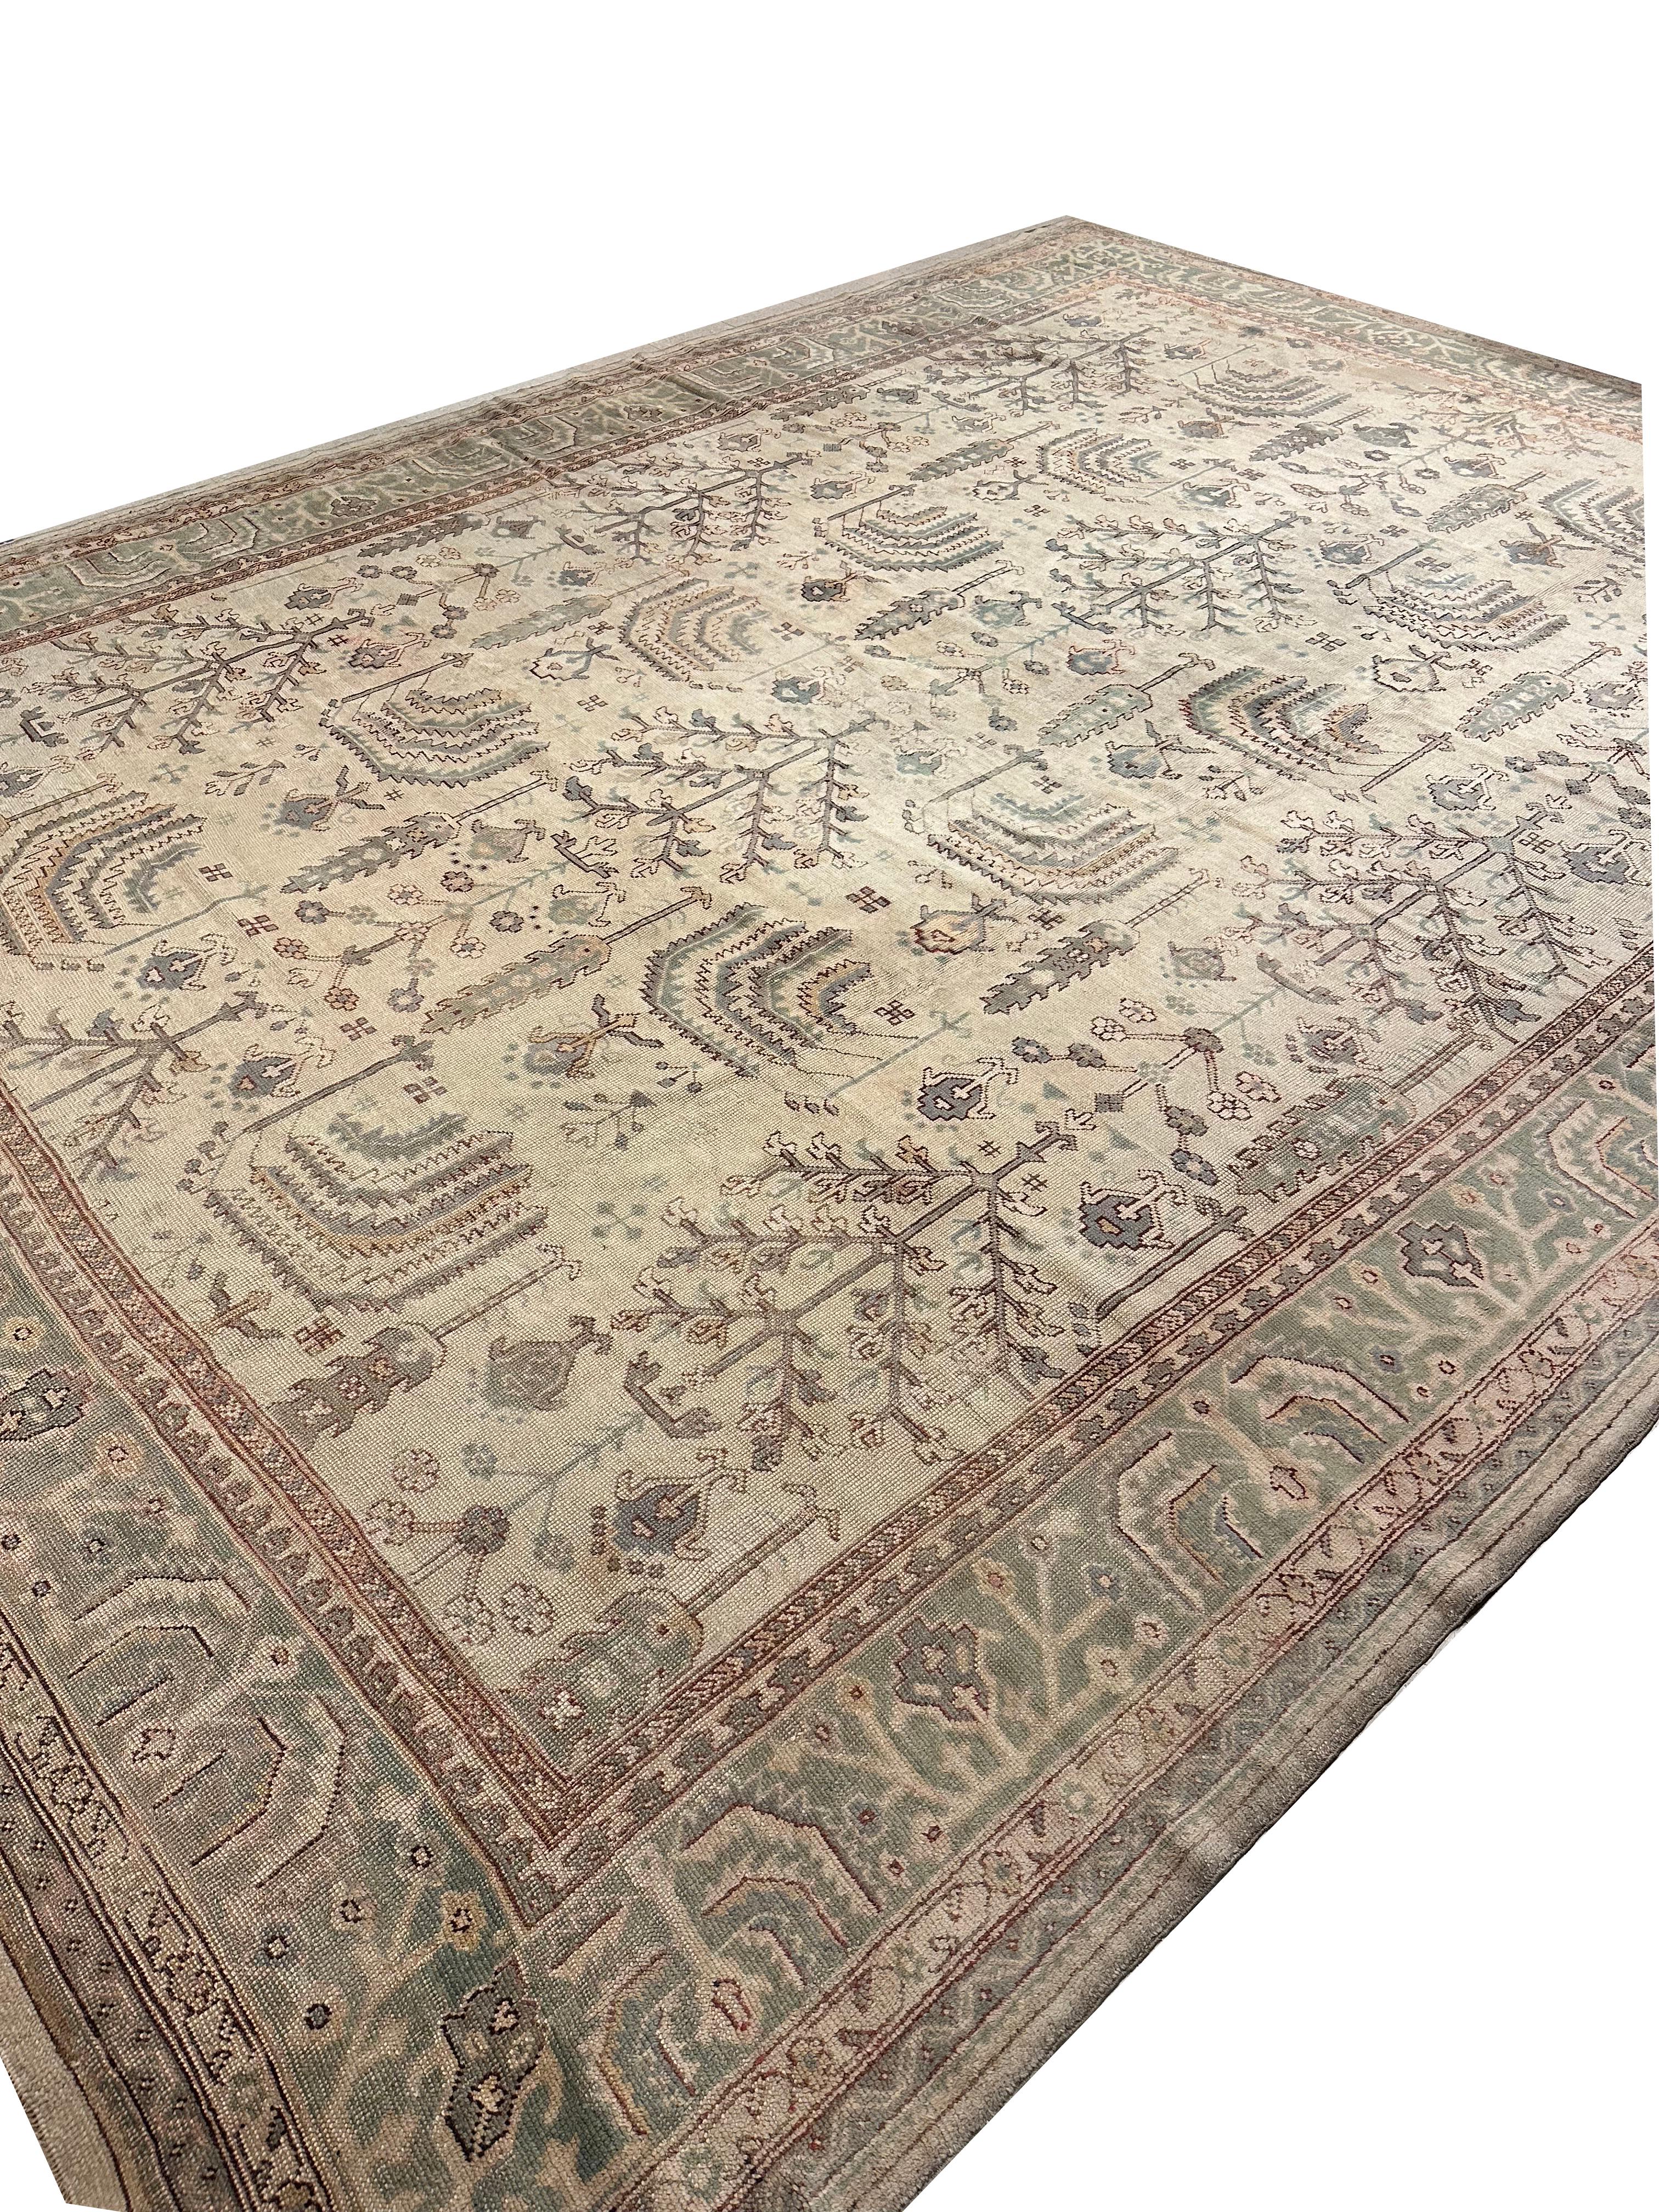 Antique Oushak Carpet, Handmade Oriental Rug Soft Taupe, Green, Beige, Pale Blue In Excellent Condition For Sale In Port Washington, NY